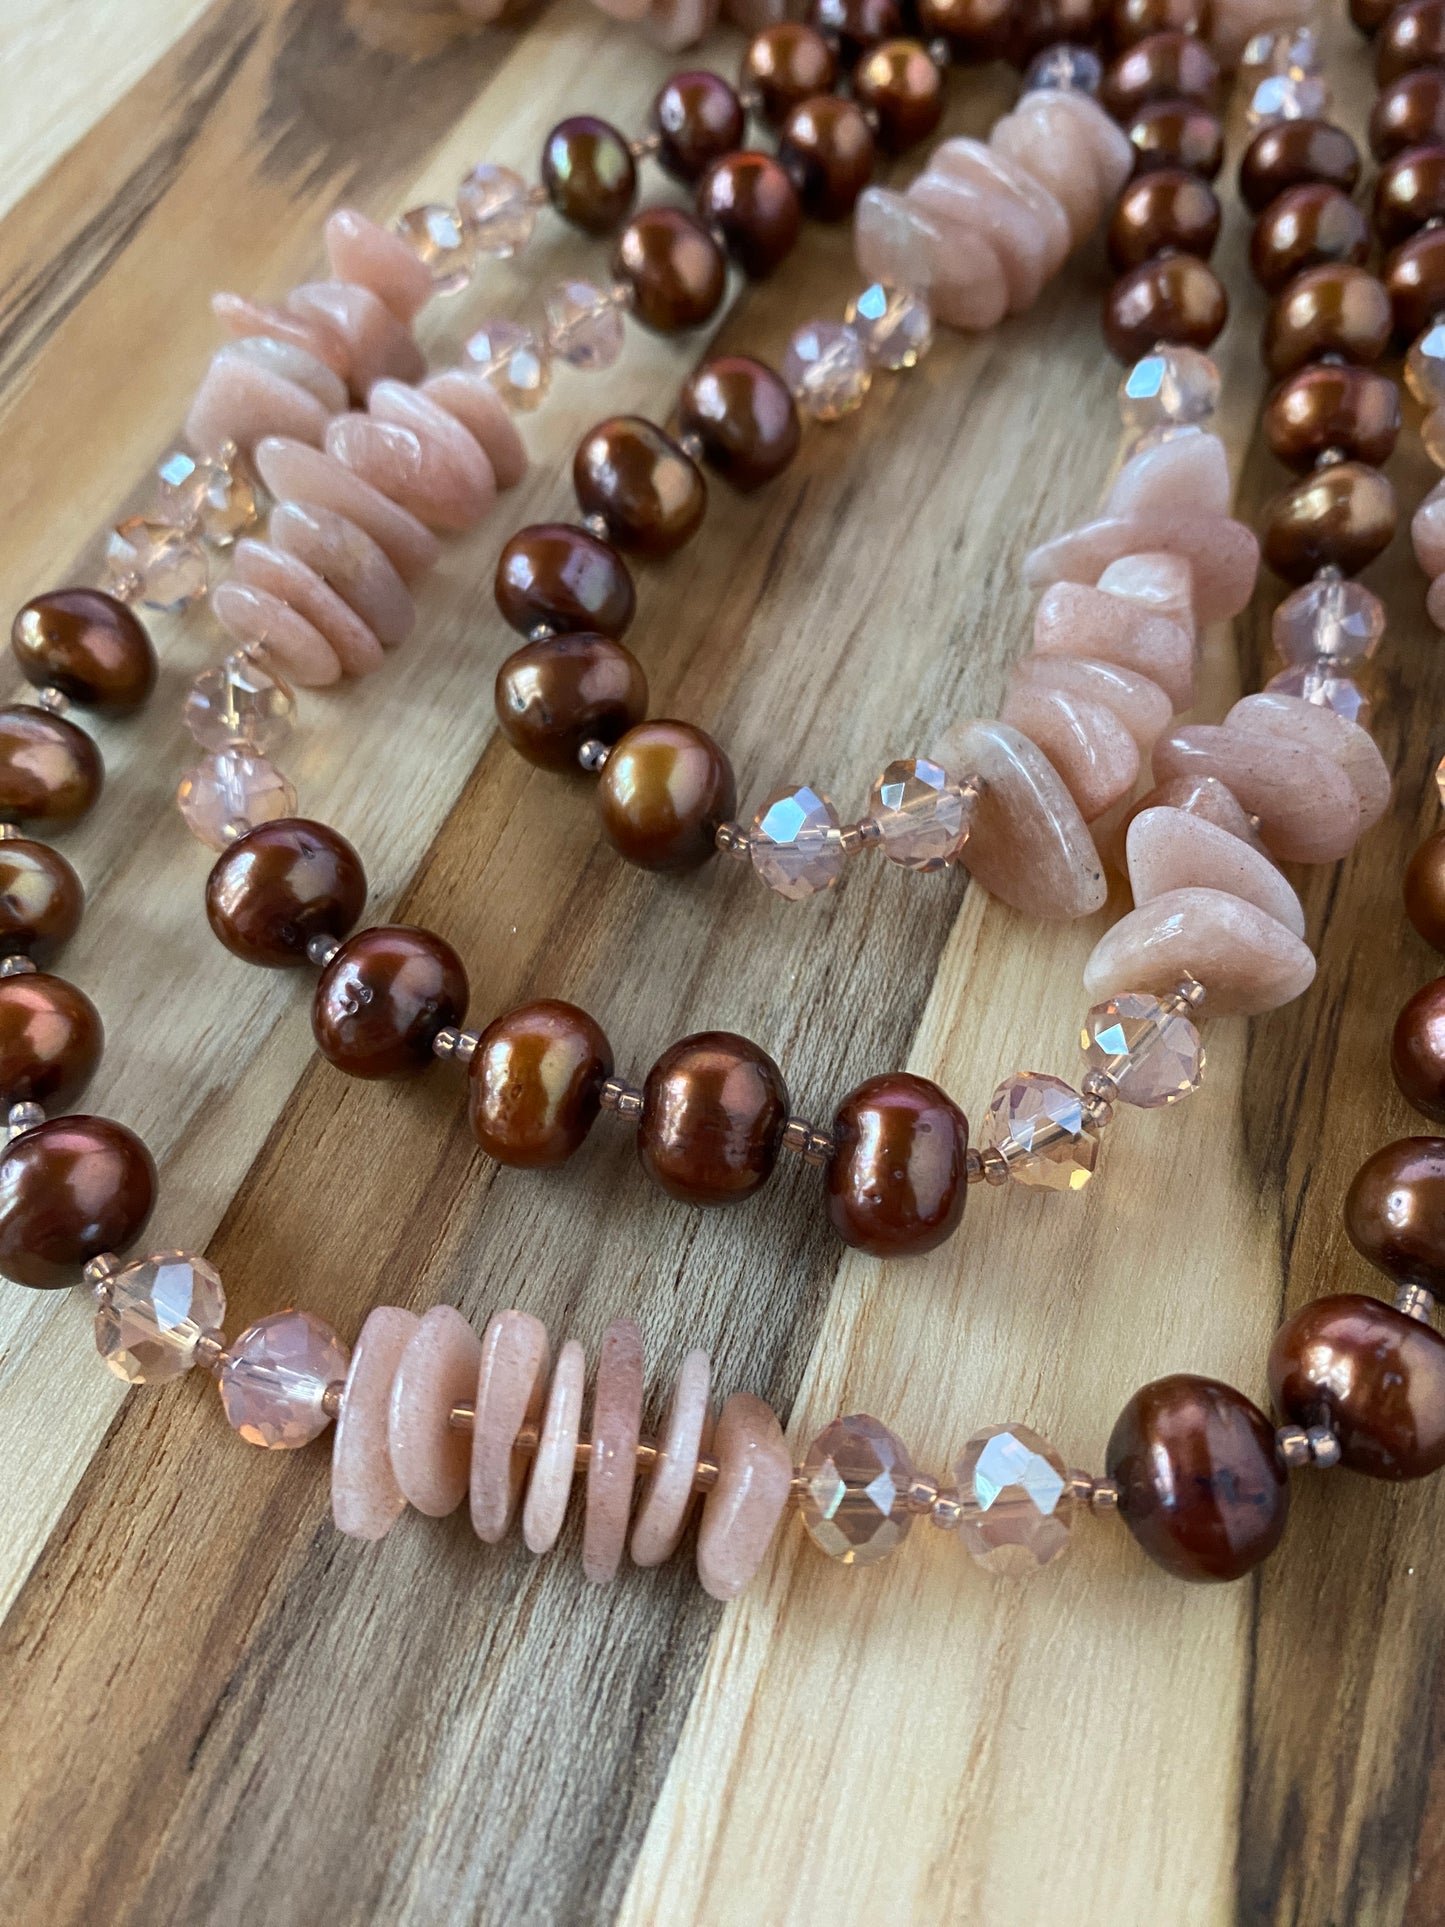 60" Extra Long Beaded Necklace with Brown Pearls, Sunstone Chips & Crystal Beads